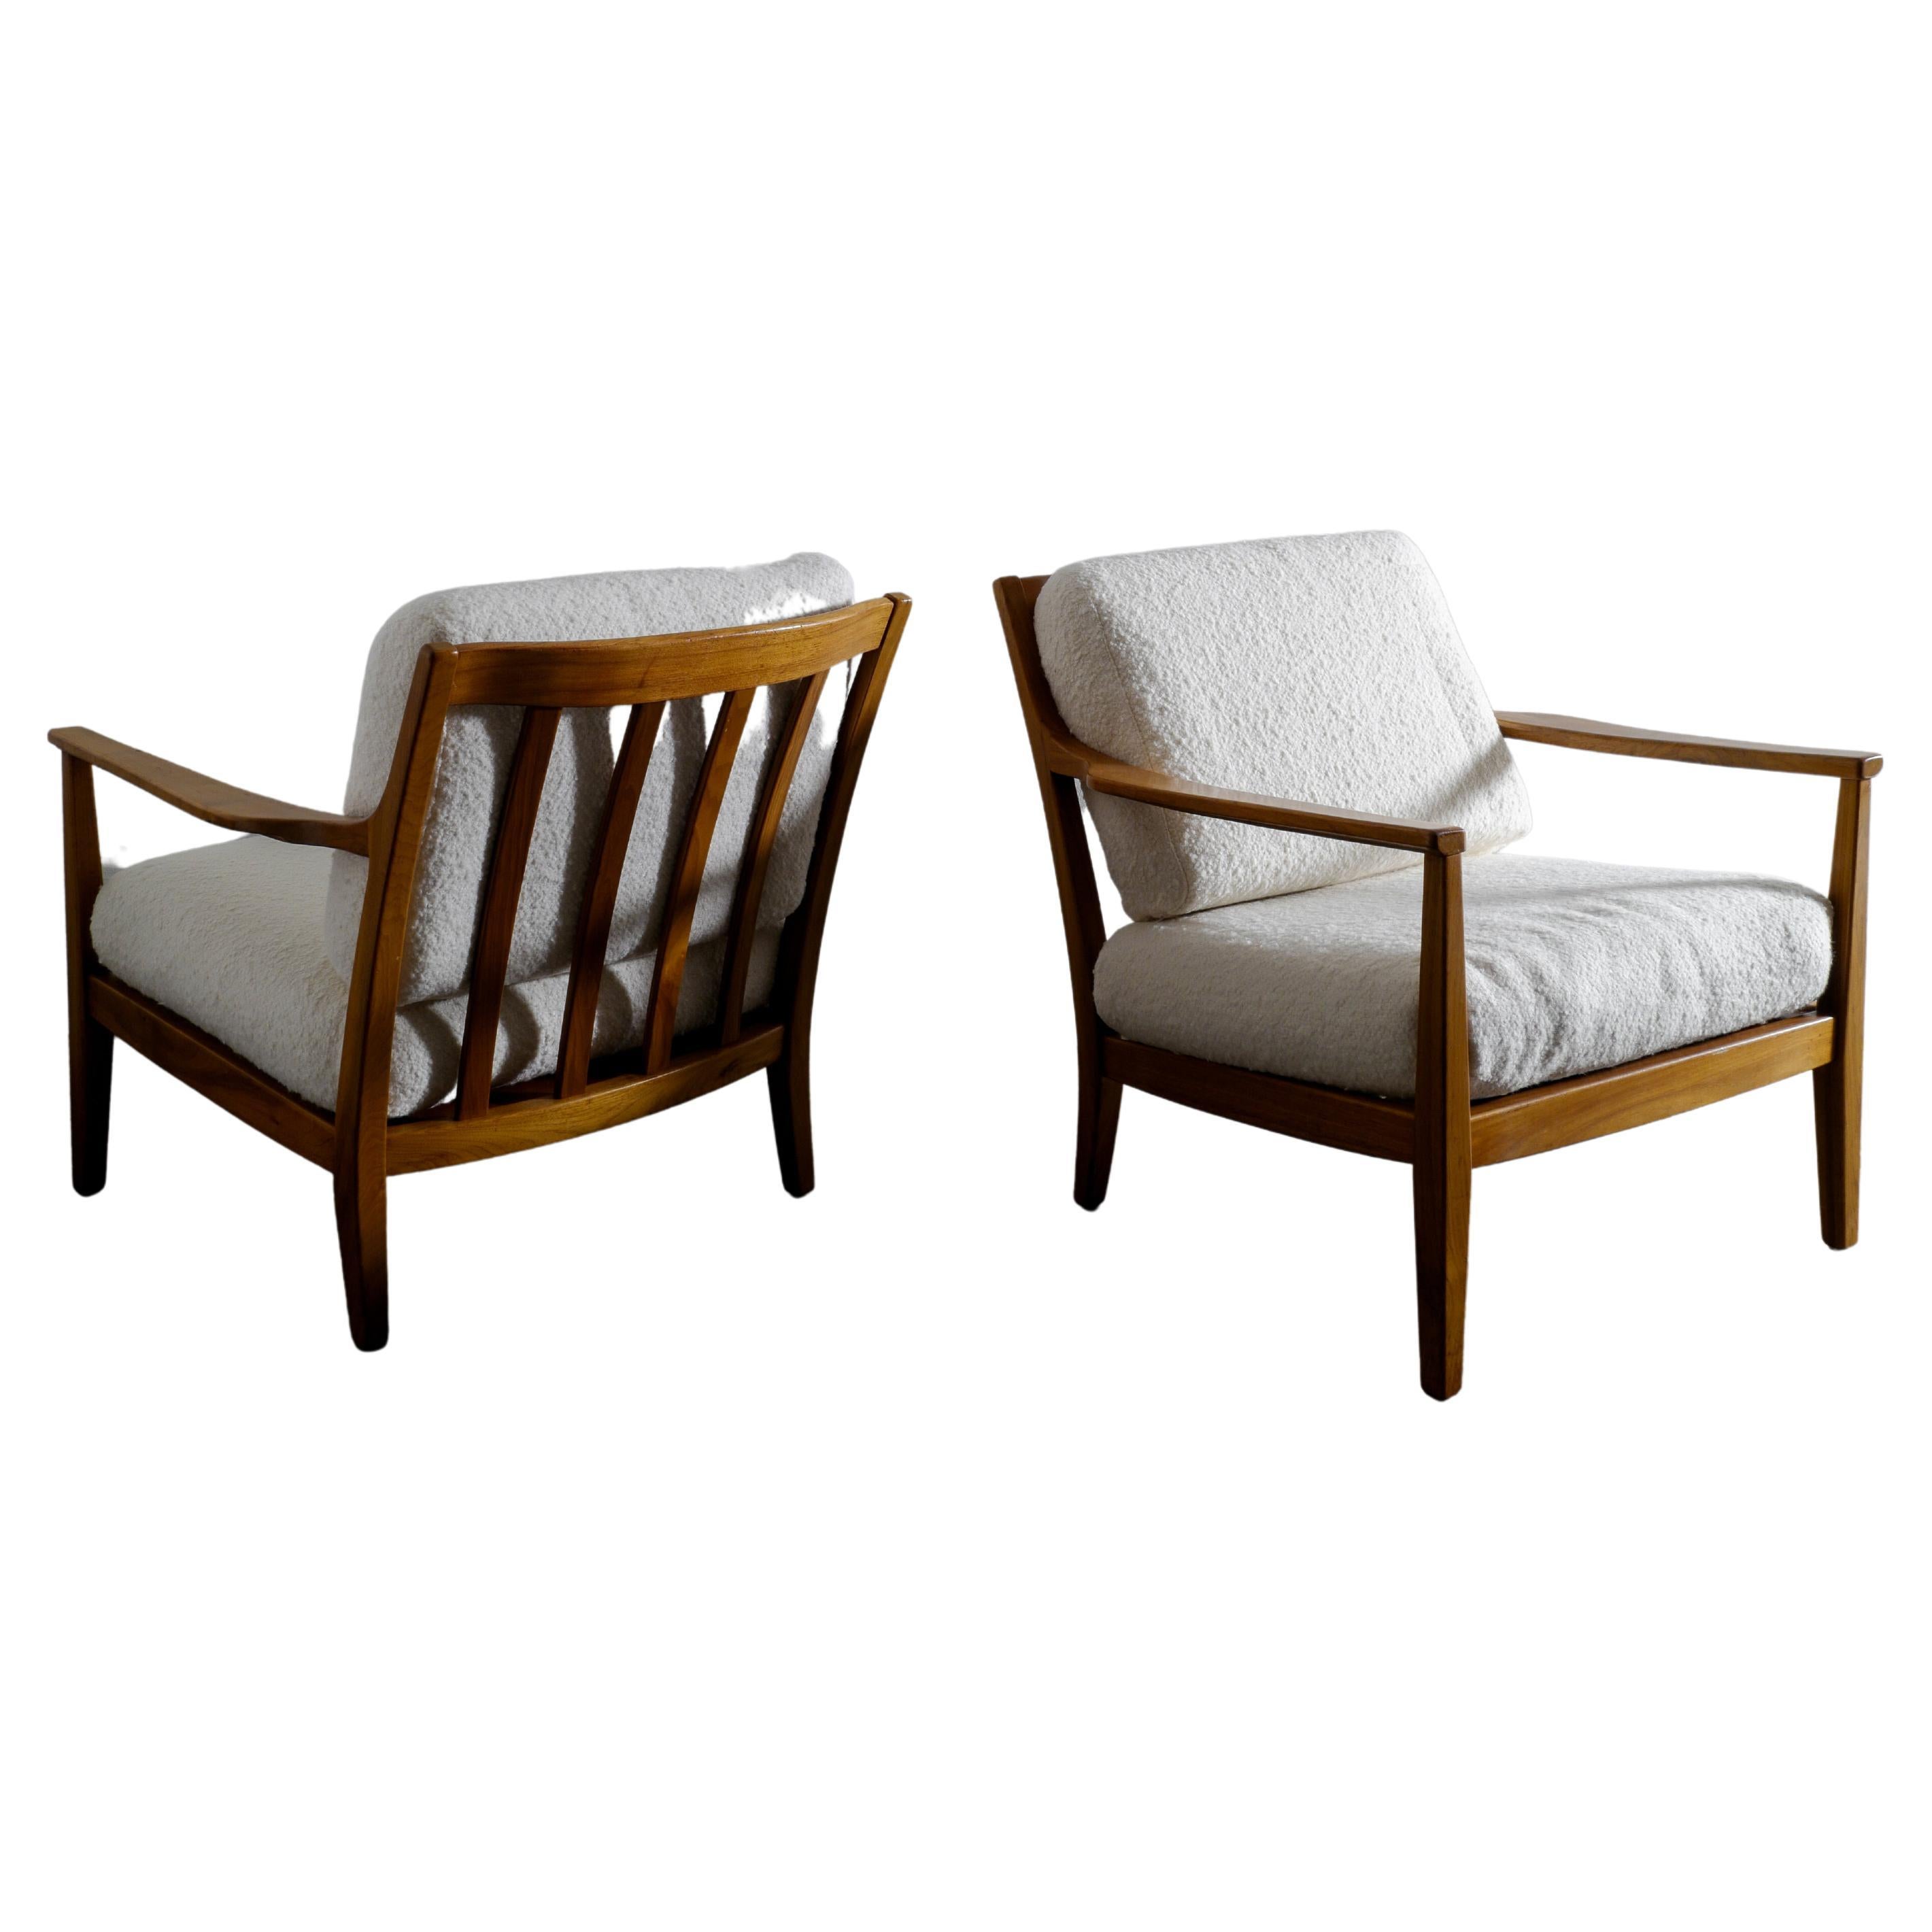 Pair of Swedish Lounge Arm Easy Chairs in Walnut and Bouclé Cushions, 1950s